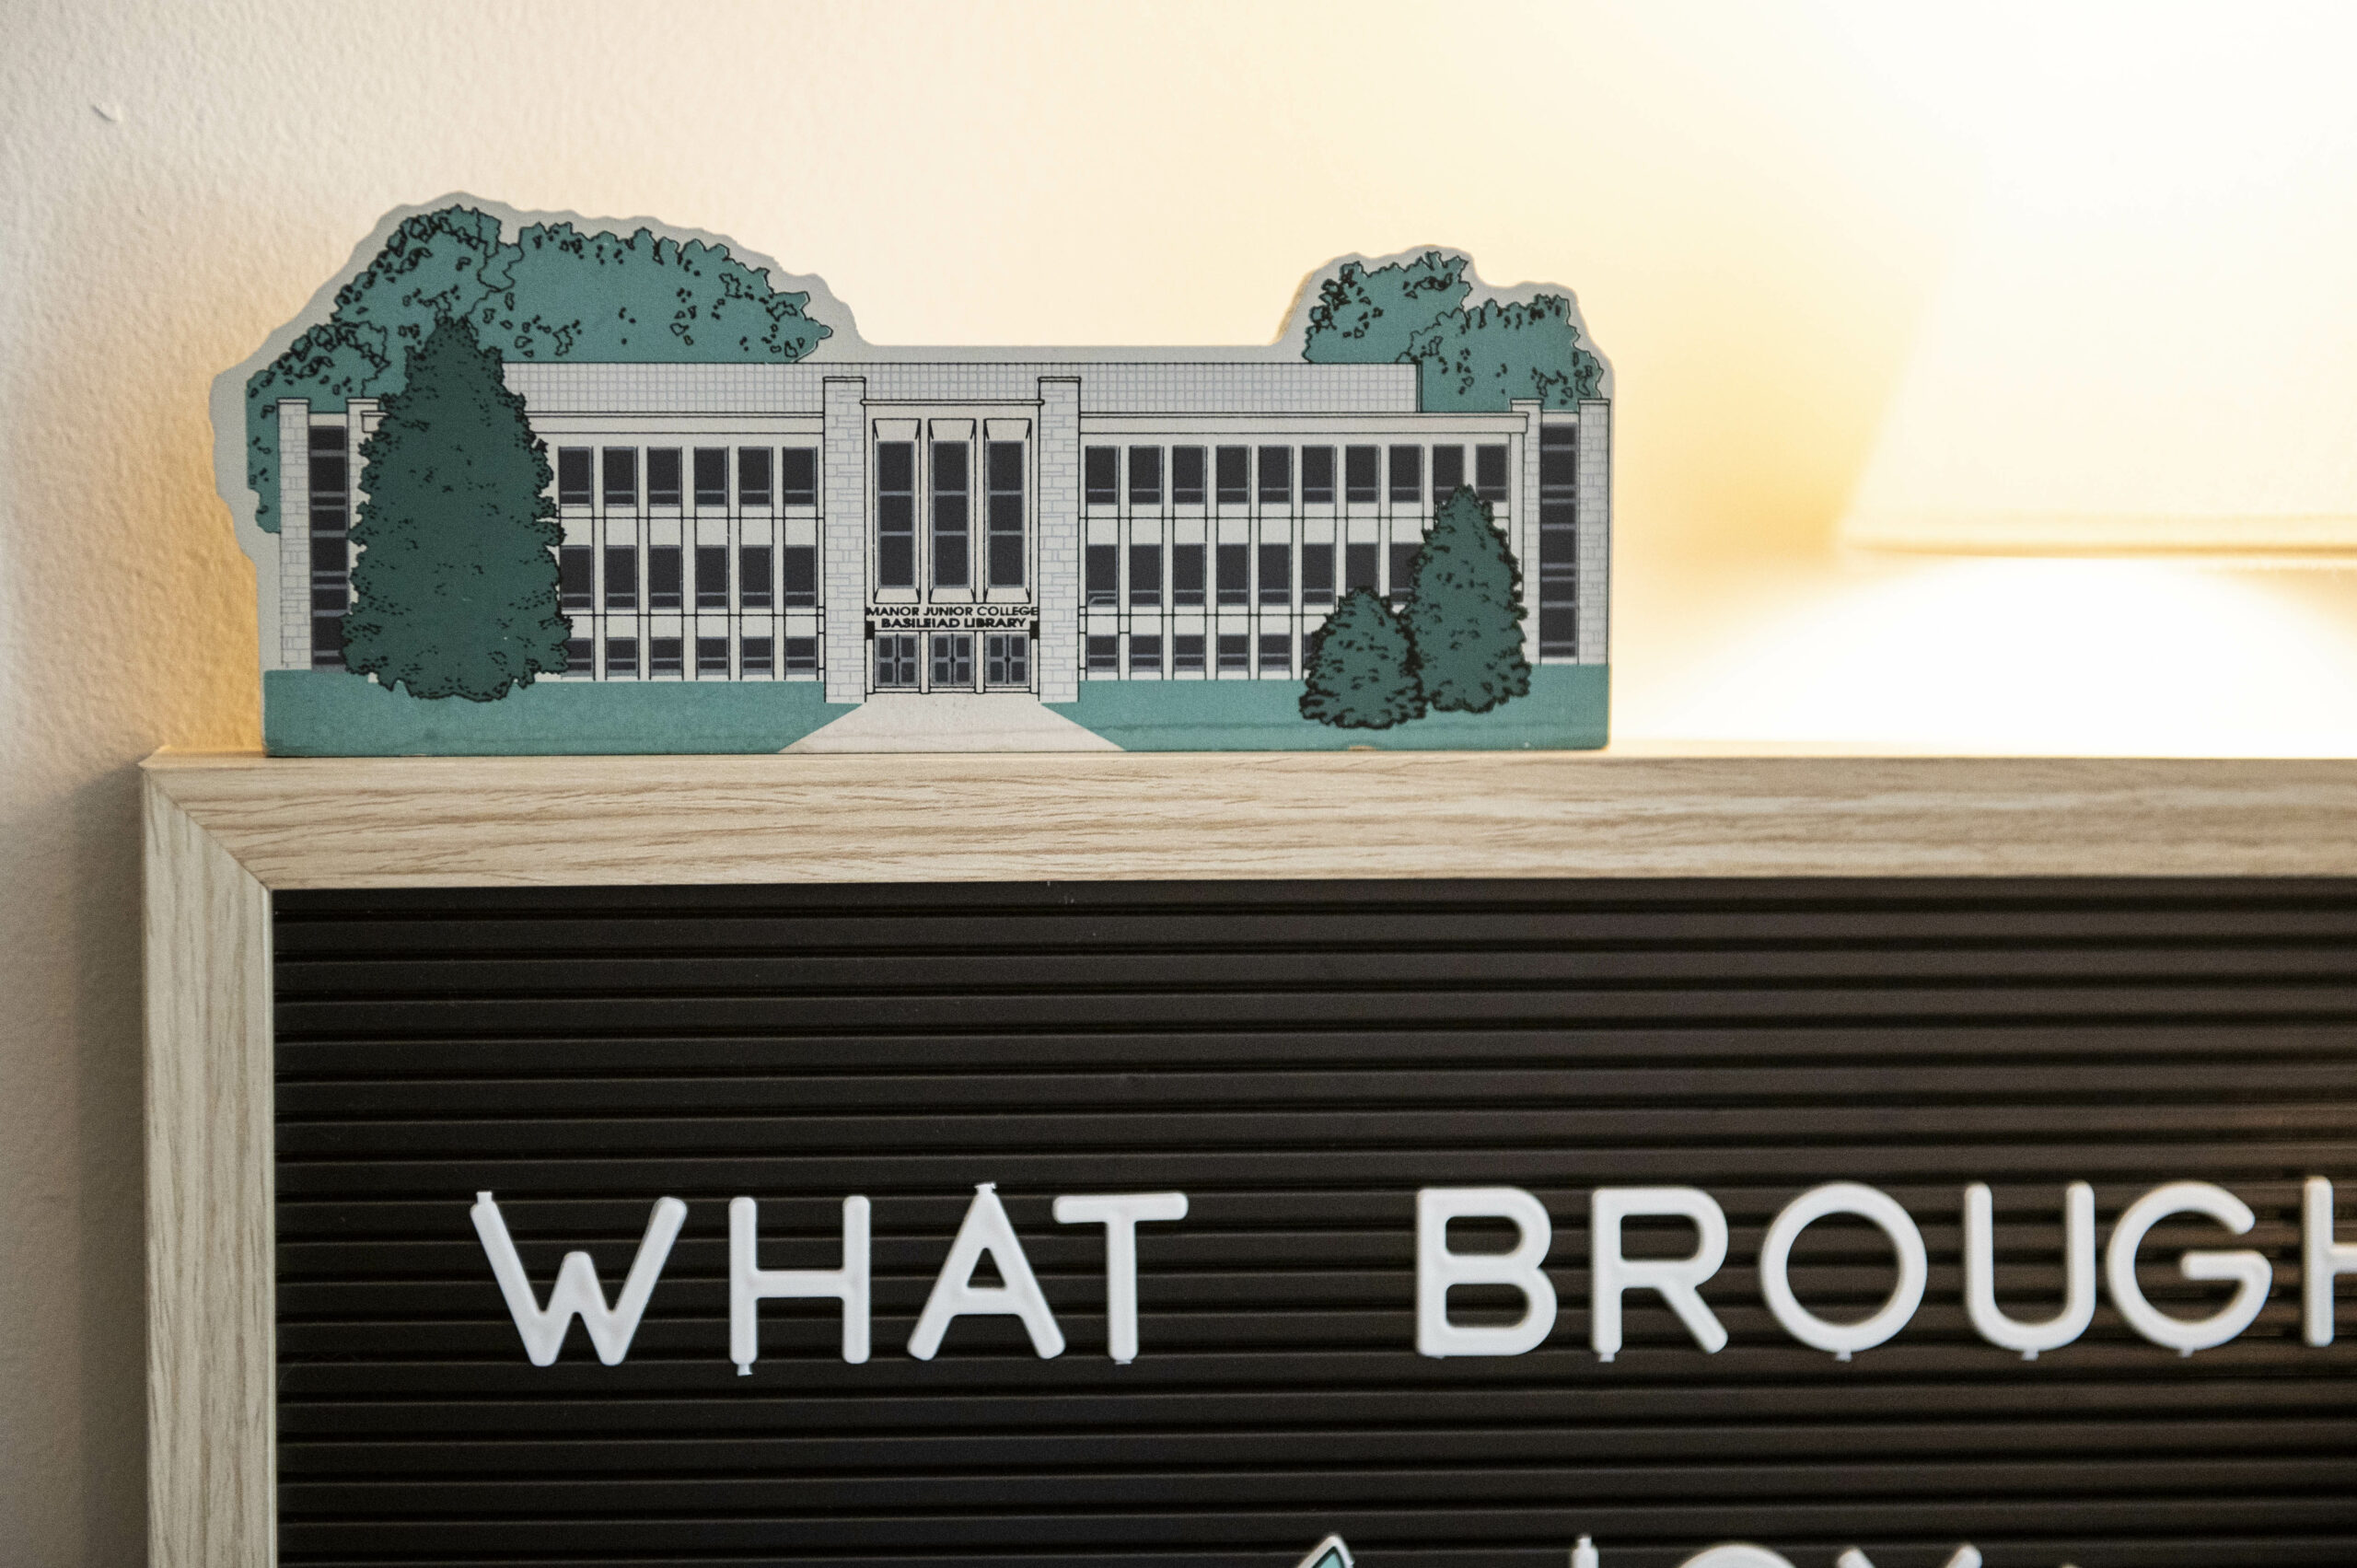 A wooden cut out depicting Manor College's Basileiad Library on display